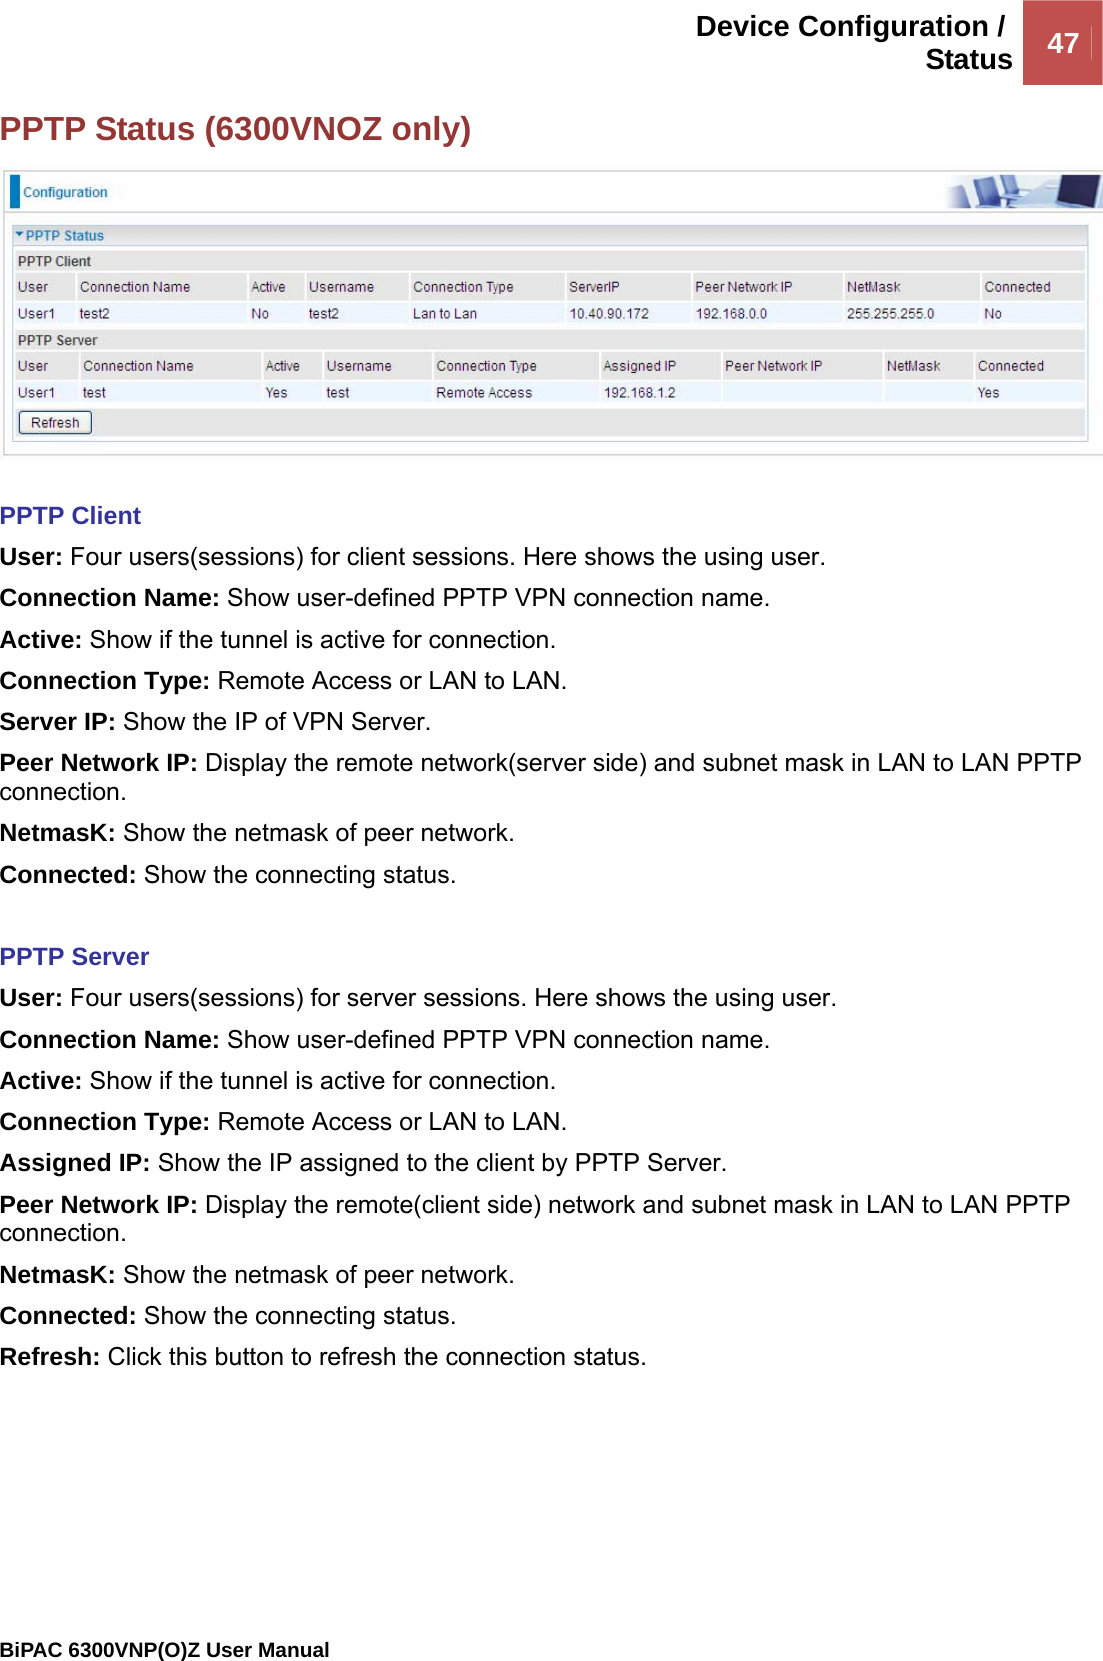  Device Configuration / Status 47                                                BiPAC 6300VNP(O)Z User Manual  PPTP Status (6300VNOZ only)   PPTP Client User: Four users(sessions) for client sessions. Here shows the using user. Connection Name: Show user-defined PPTP VPN connection name. Active: Show if the tunnel is active for connection. Connection Type: Remote Access or LAN to LAN. Server IP: Show the IP of VPN Server. Peer Network IP: Display the remote network(server side) and subnet mask in LAN to LAN PPTP connection. NetmasK: Show the netmask of peer network. Connected: Show the connecting status.  PPTP Server User: Four users(sessions) for server sessions. Here shows the using user. Connection Name: Show user-defined PPTP VPN connection name. Active: Show if the tunnel is active for connection. Connection Type: Remote Access or LAN to LAN. Assigned IP: Show the IP assigned to the client by PPTP Server. Peer Network IP: Display the remote(client side) network and subnet mask in LAN to LAN PPTP connection. NetmasK: Show the netmask of peer network. Connected: Show the connecting status. Refresh: Click this button to refresh the connection status.      